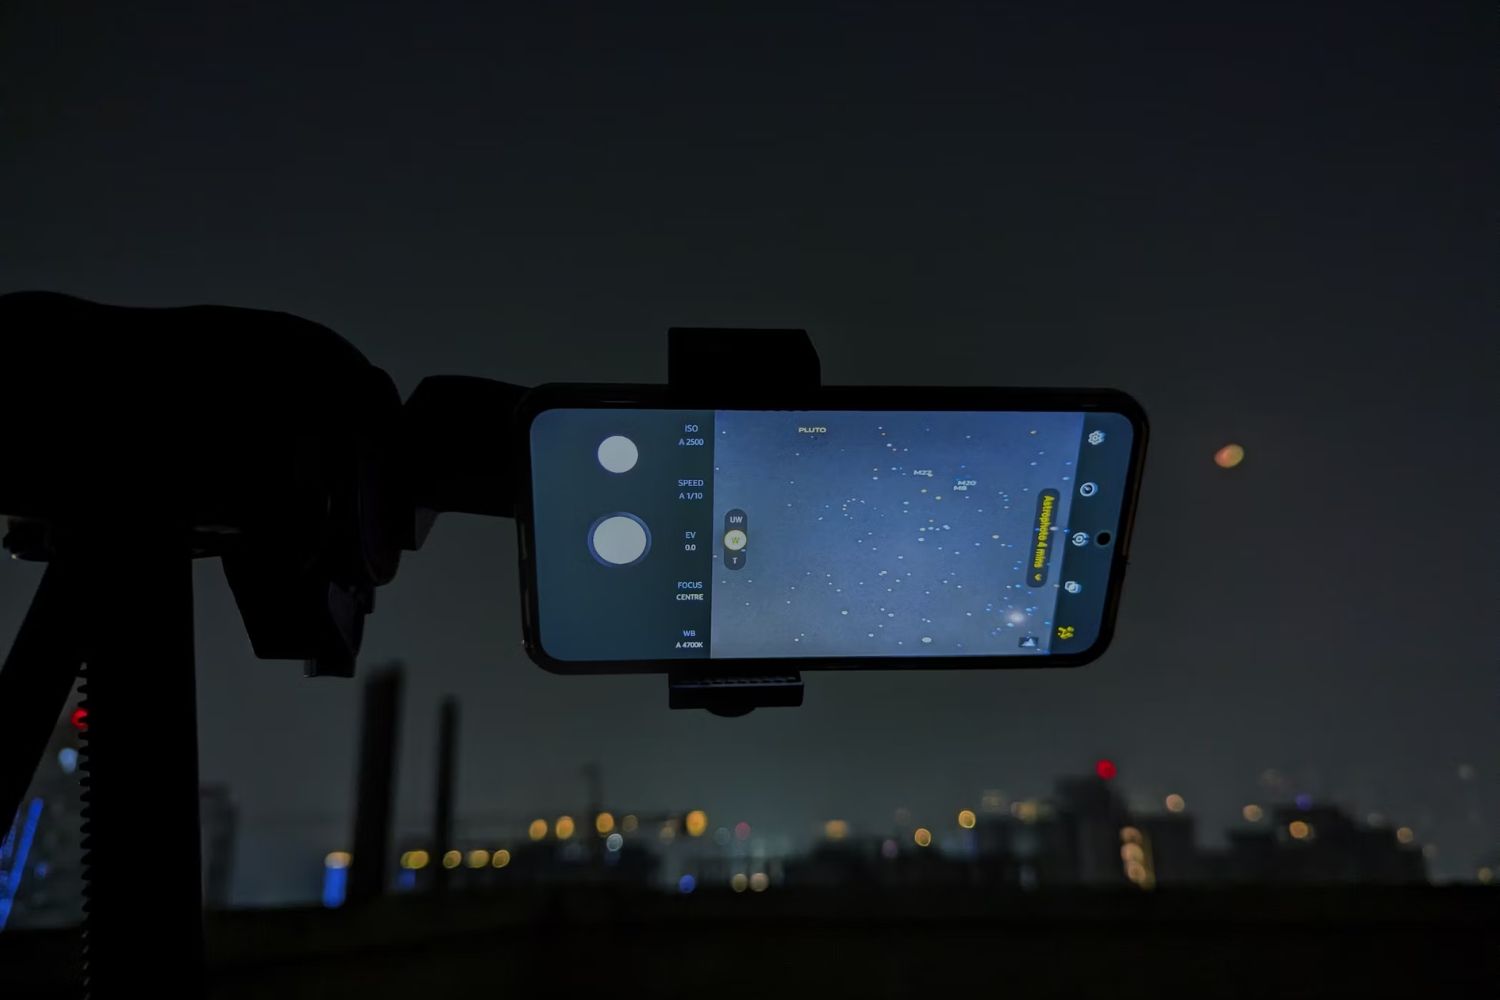 Stargazing Photography: Capturing Stars With Samsung S20